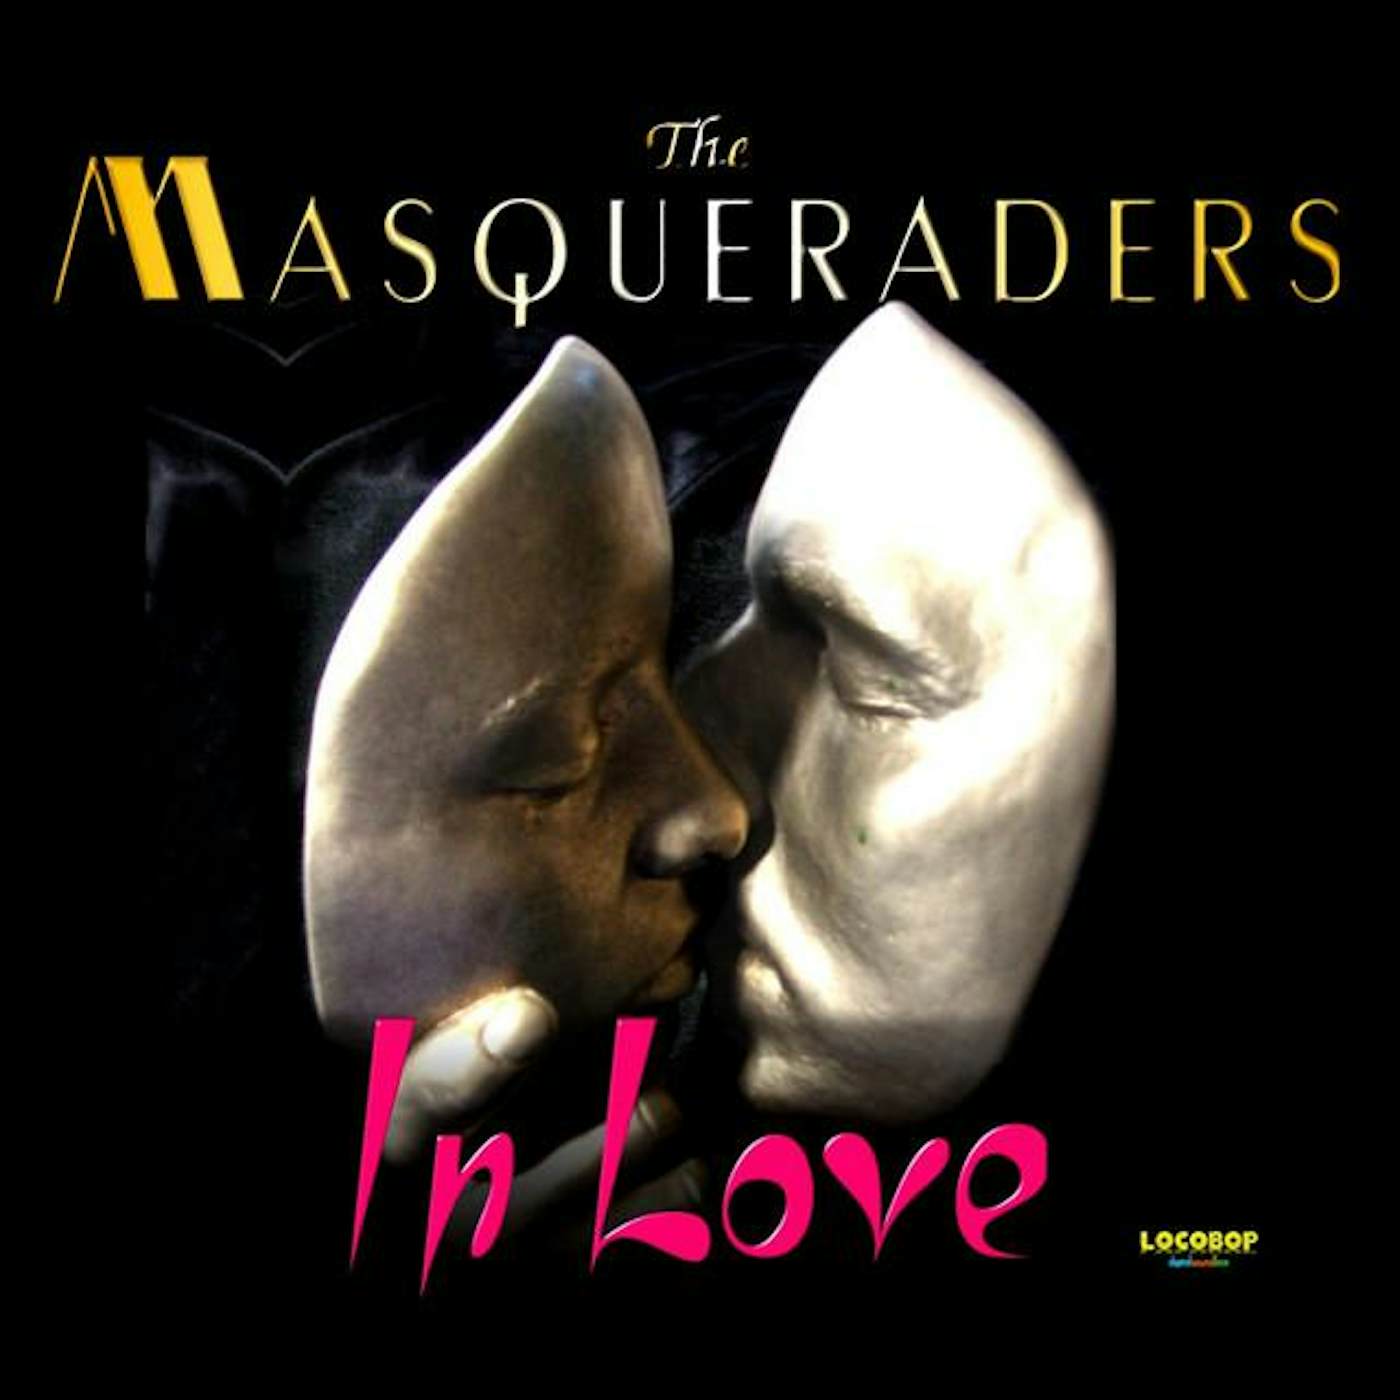 The Masqueraders